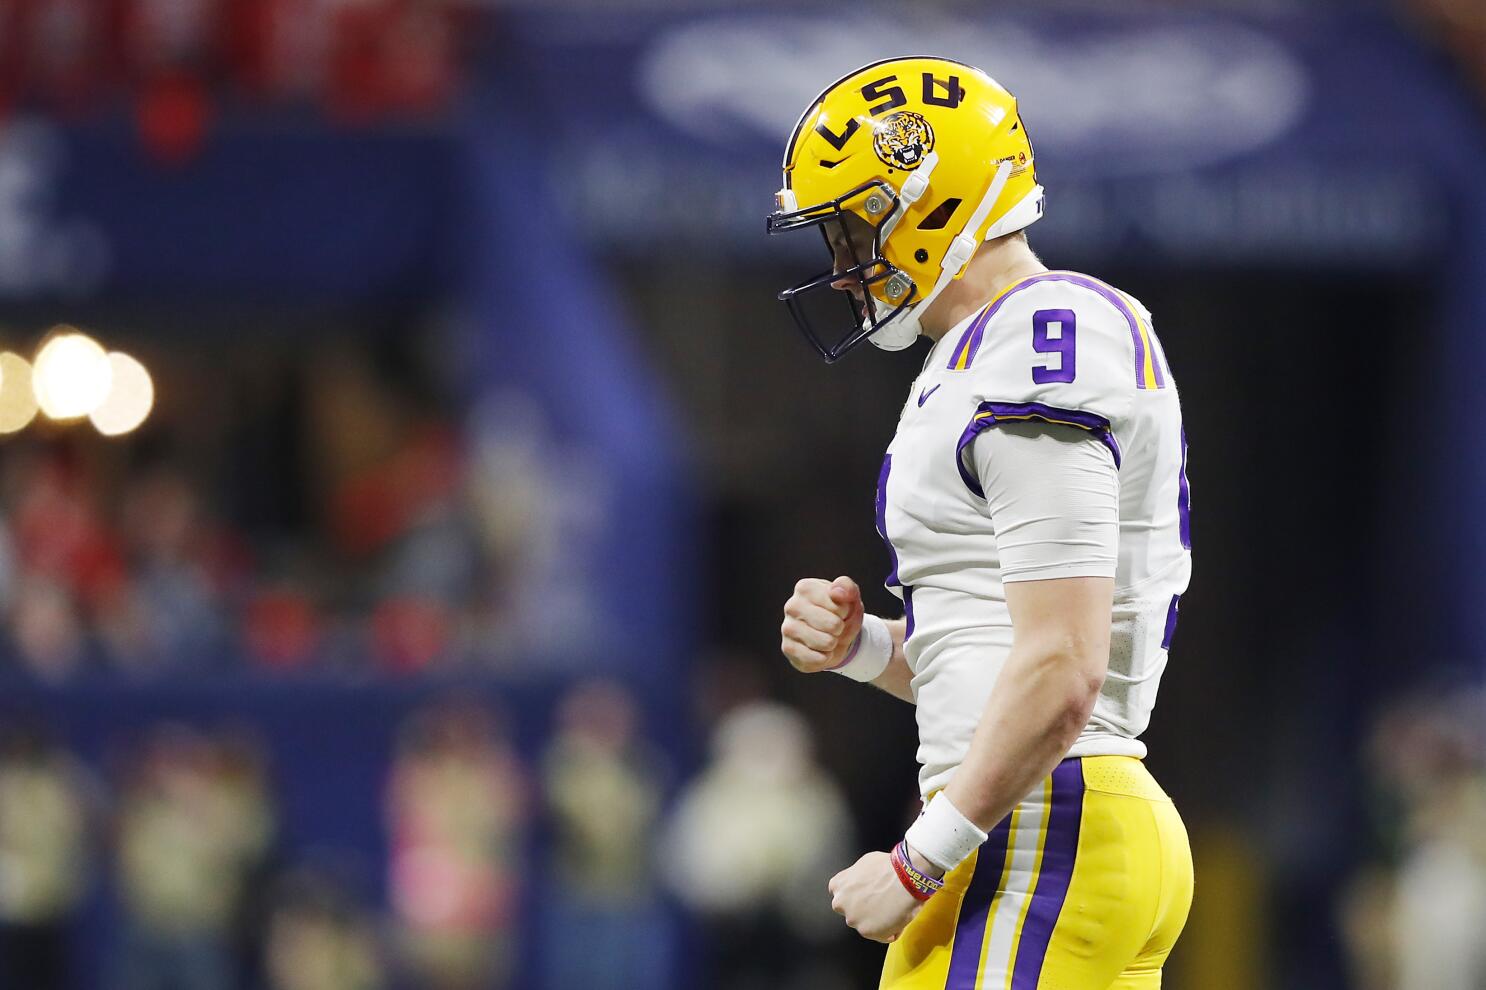 The legend of Joe Burrow: From overlooked at Ohio State to Heisman  frontrunner at LSU